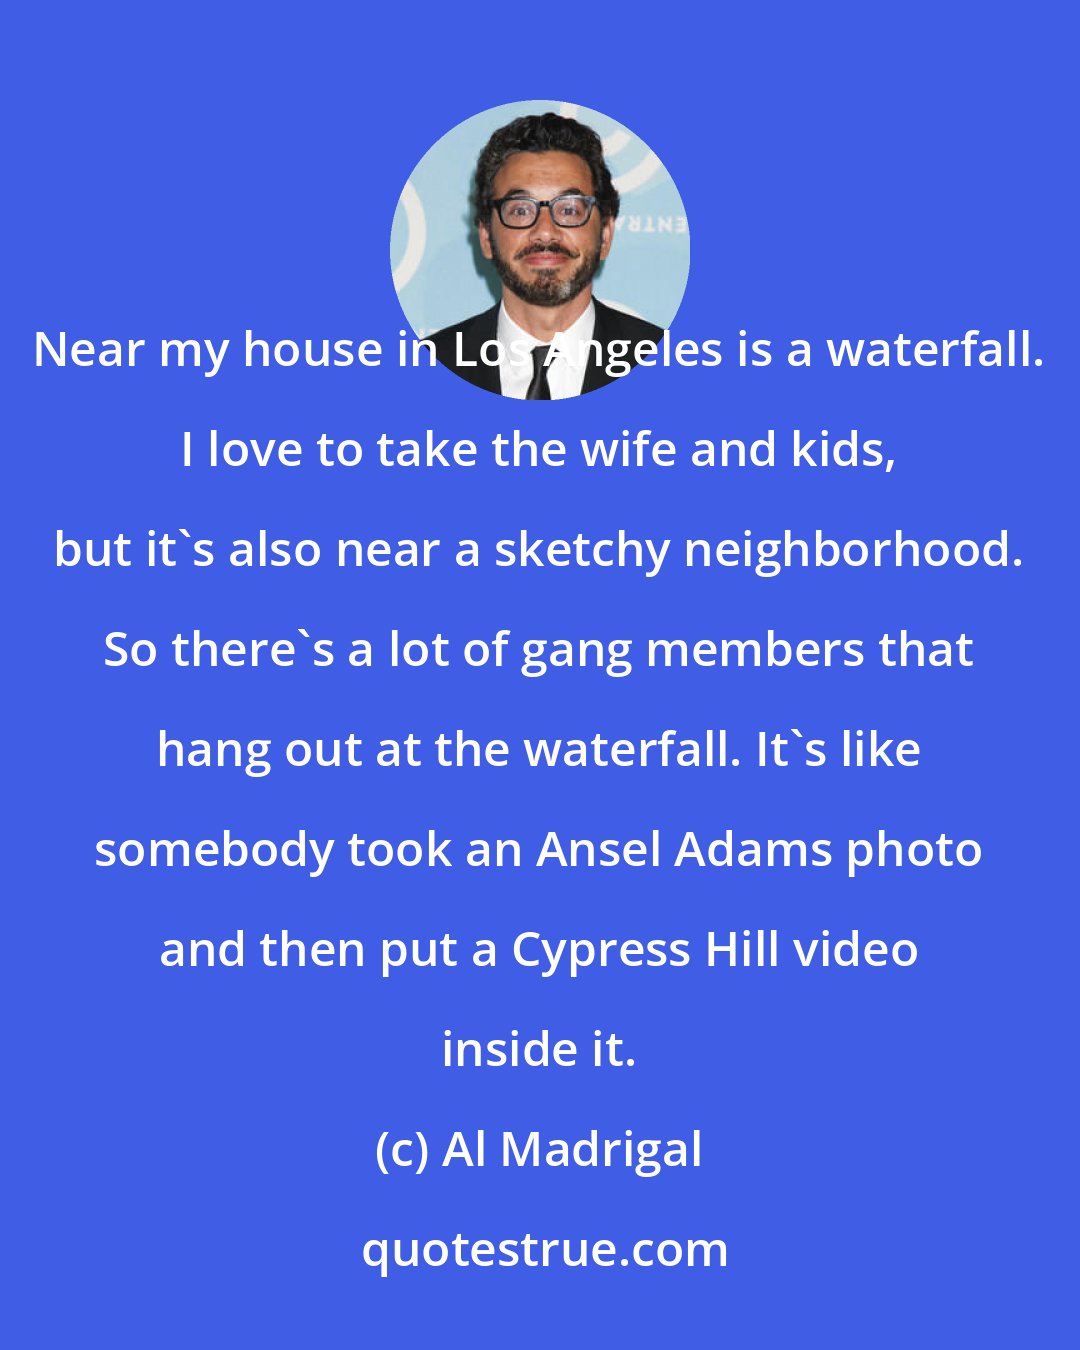 Al Madrigal: Near my house in Los Angeles is a waterfall. I love to take the wife and kids, but it's also near a sketchy neighborhood. So there's a lot of gang members that hang out at the waterfall. It's like somebody took an Ansel Adams photo and then put a Cypress Hill video inside it.